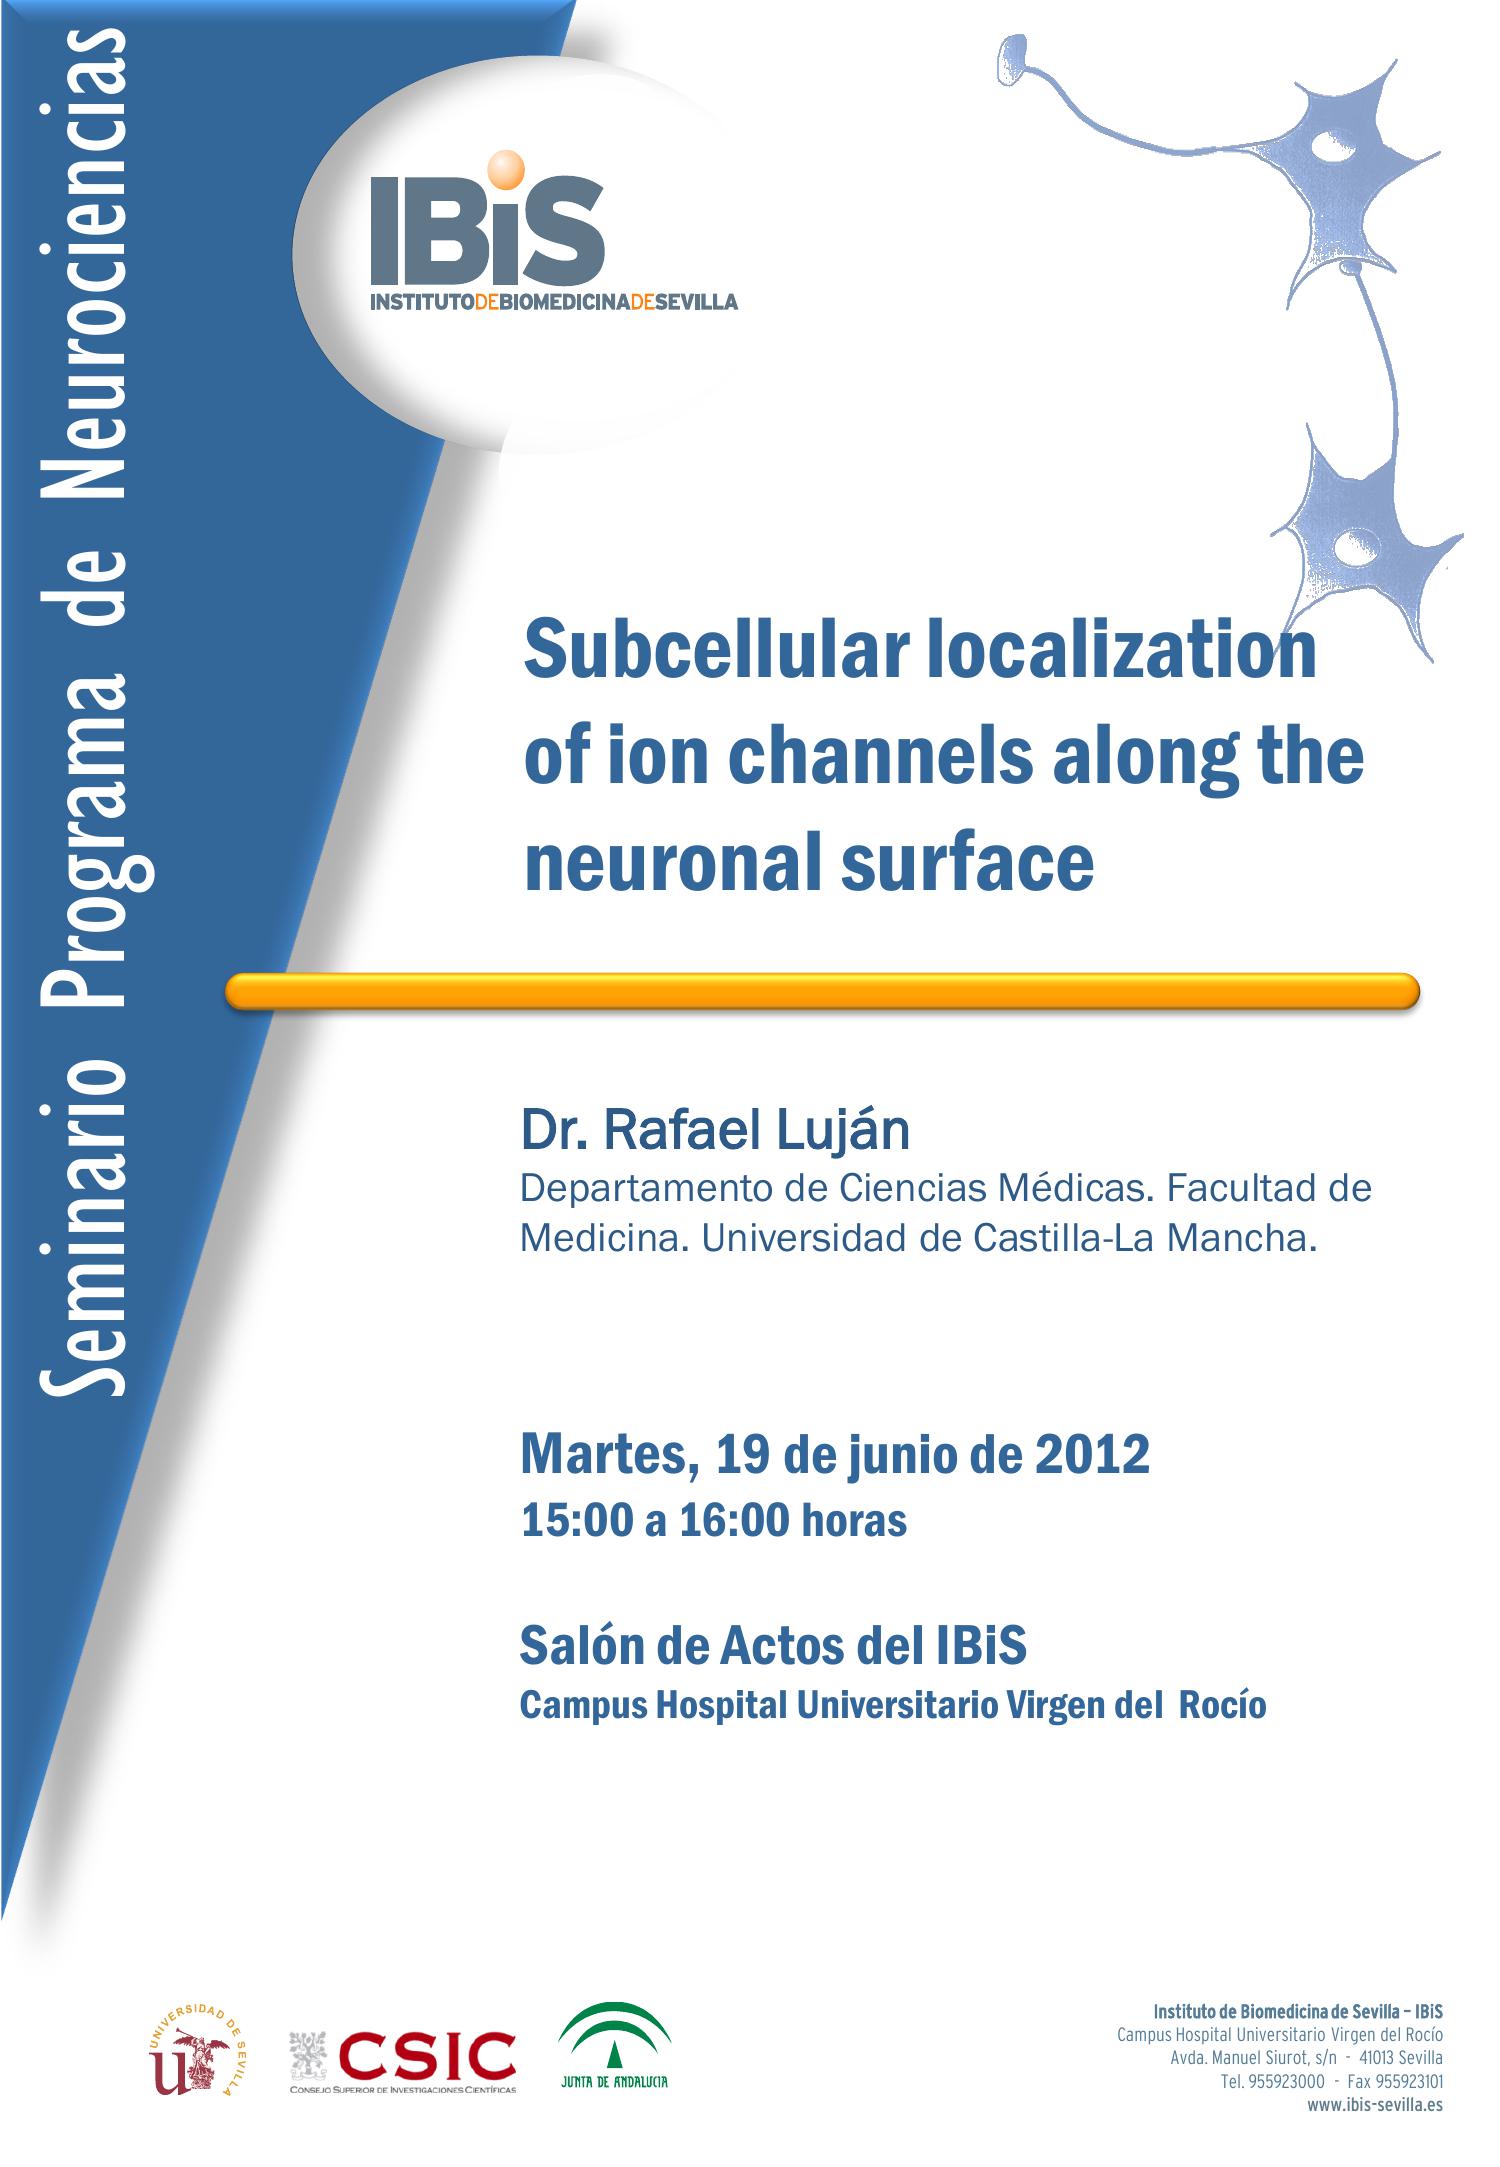 Poster: Subcellular localization of ion channels along the neuronal surface.